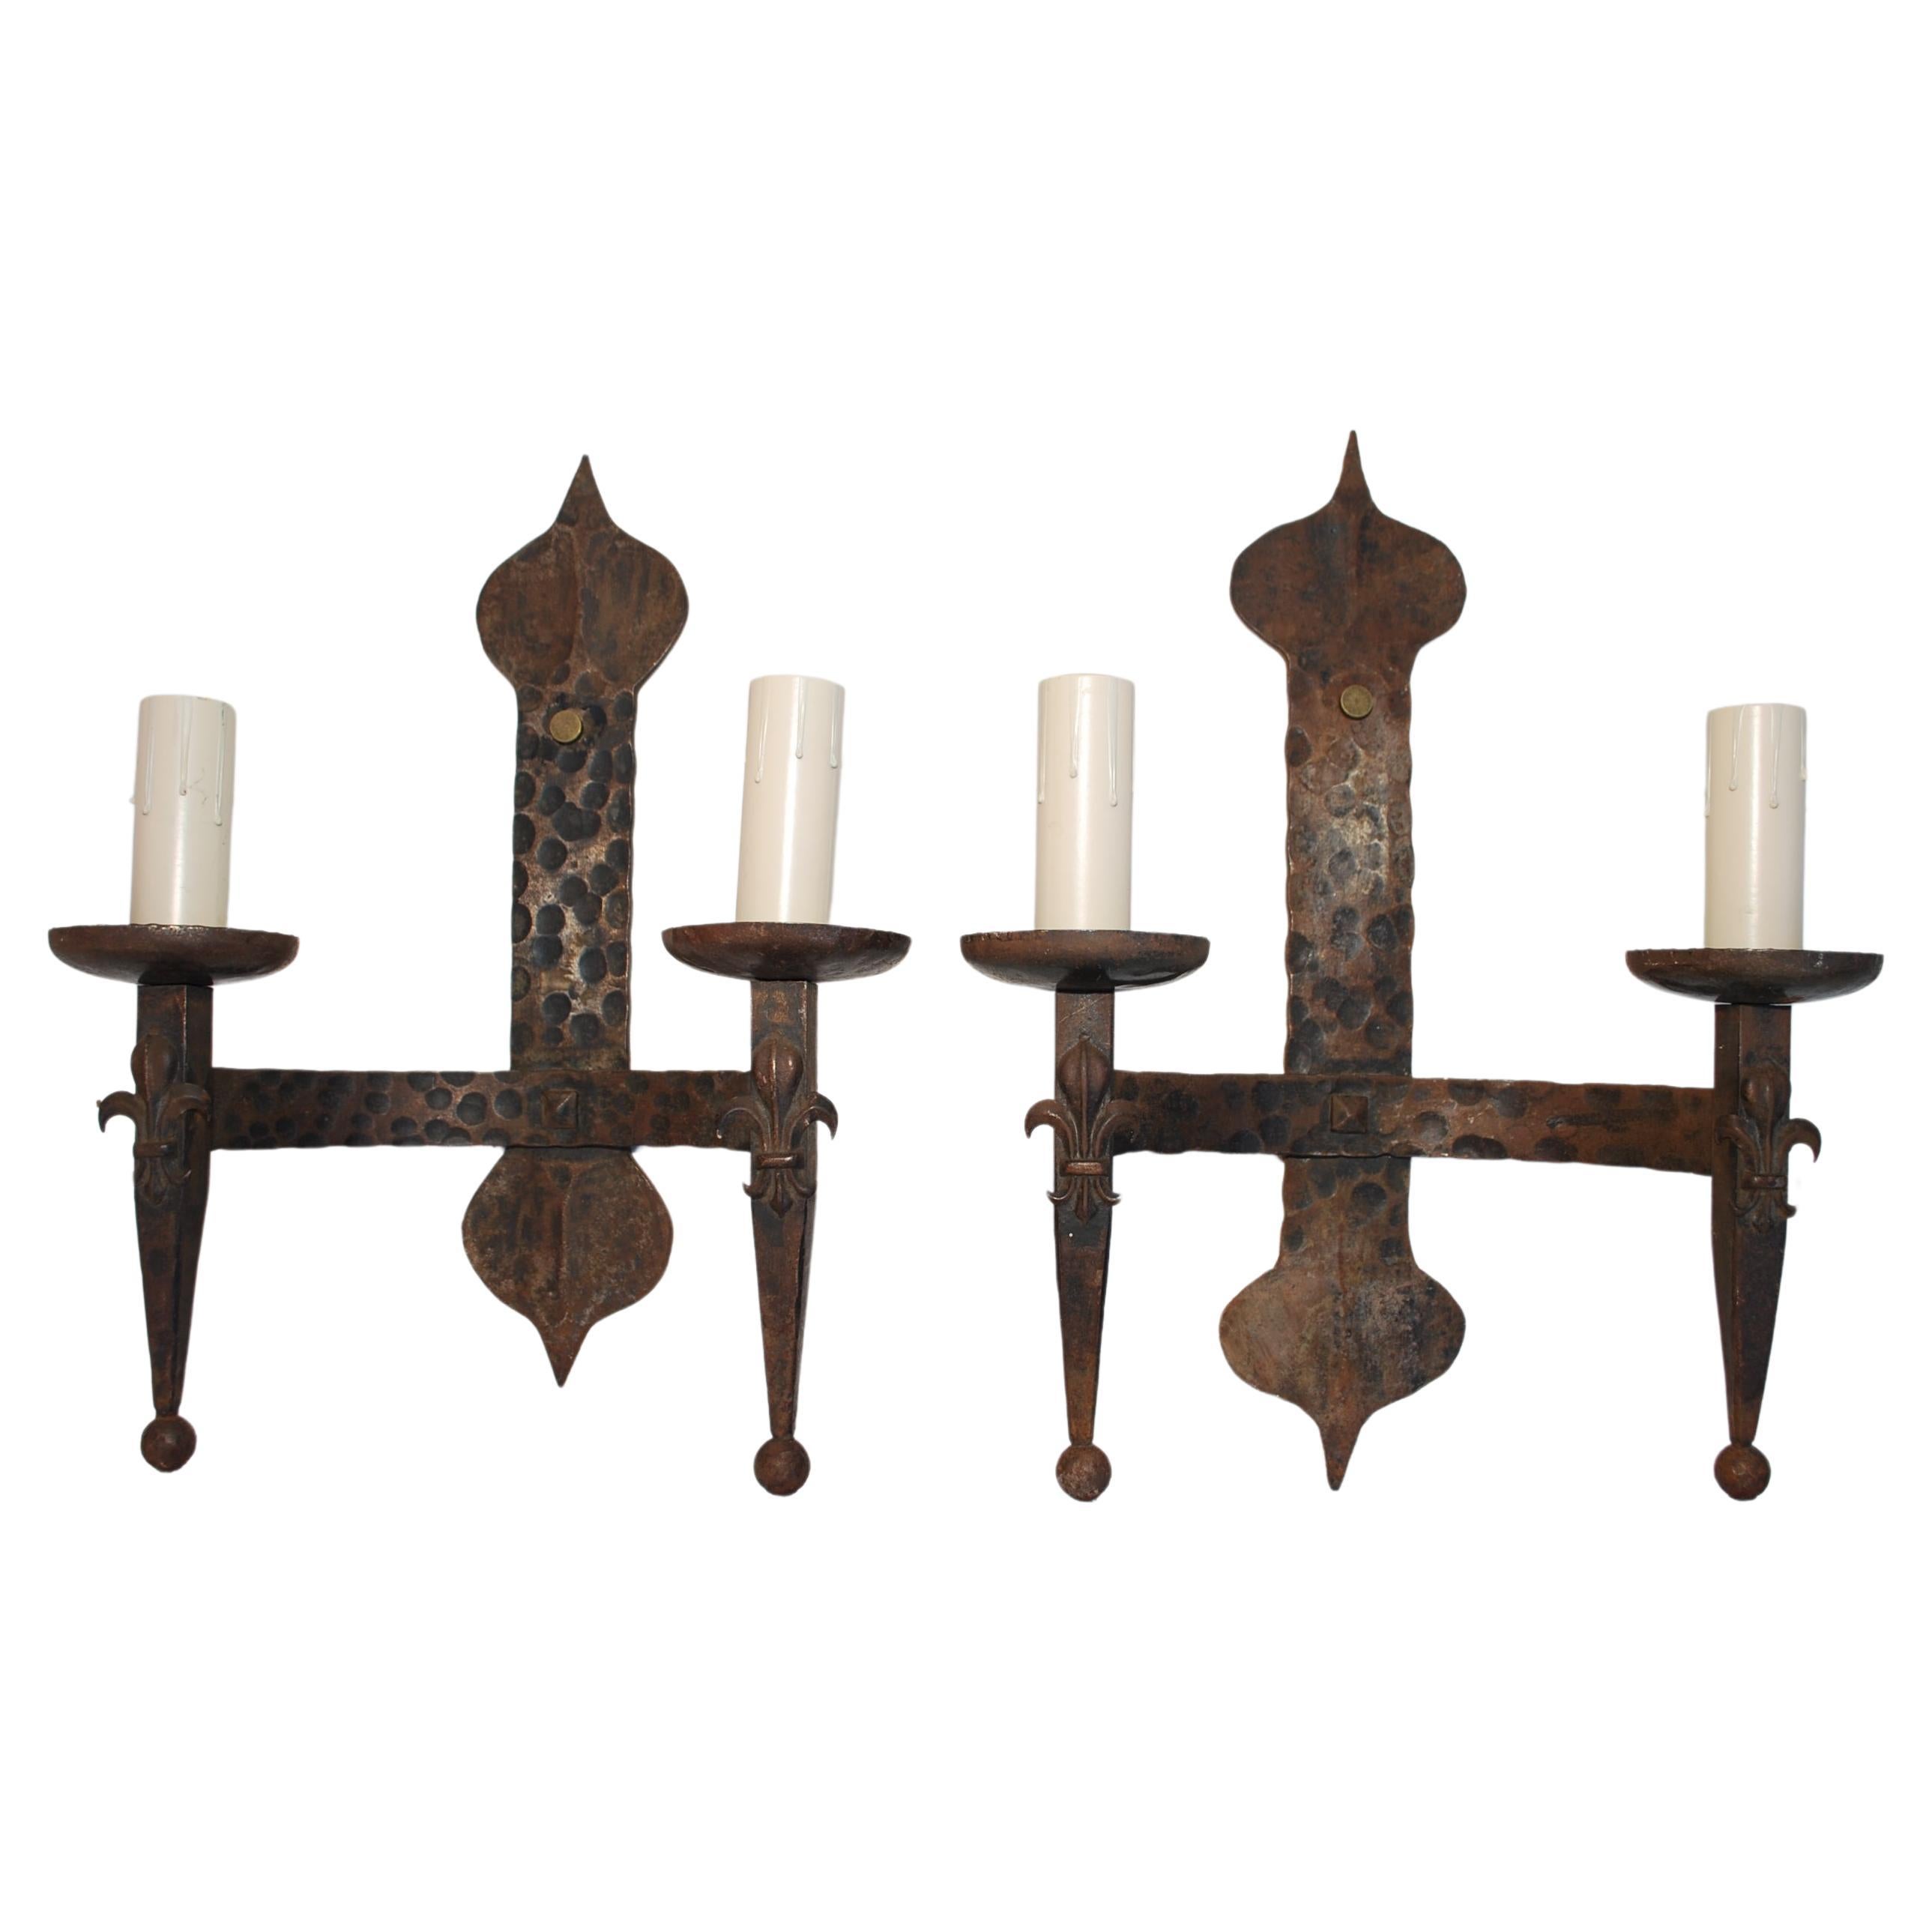 Elegant pair of 1930's wrought iron sconces For Sale